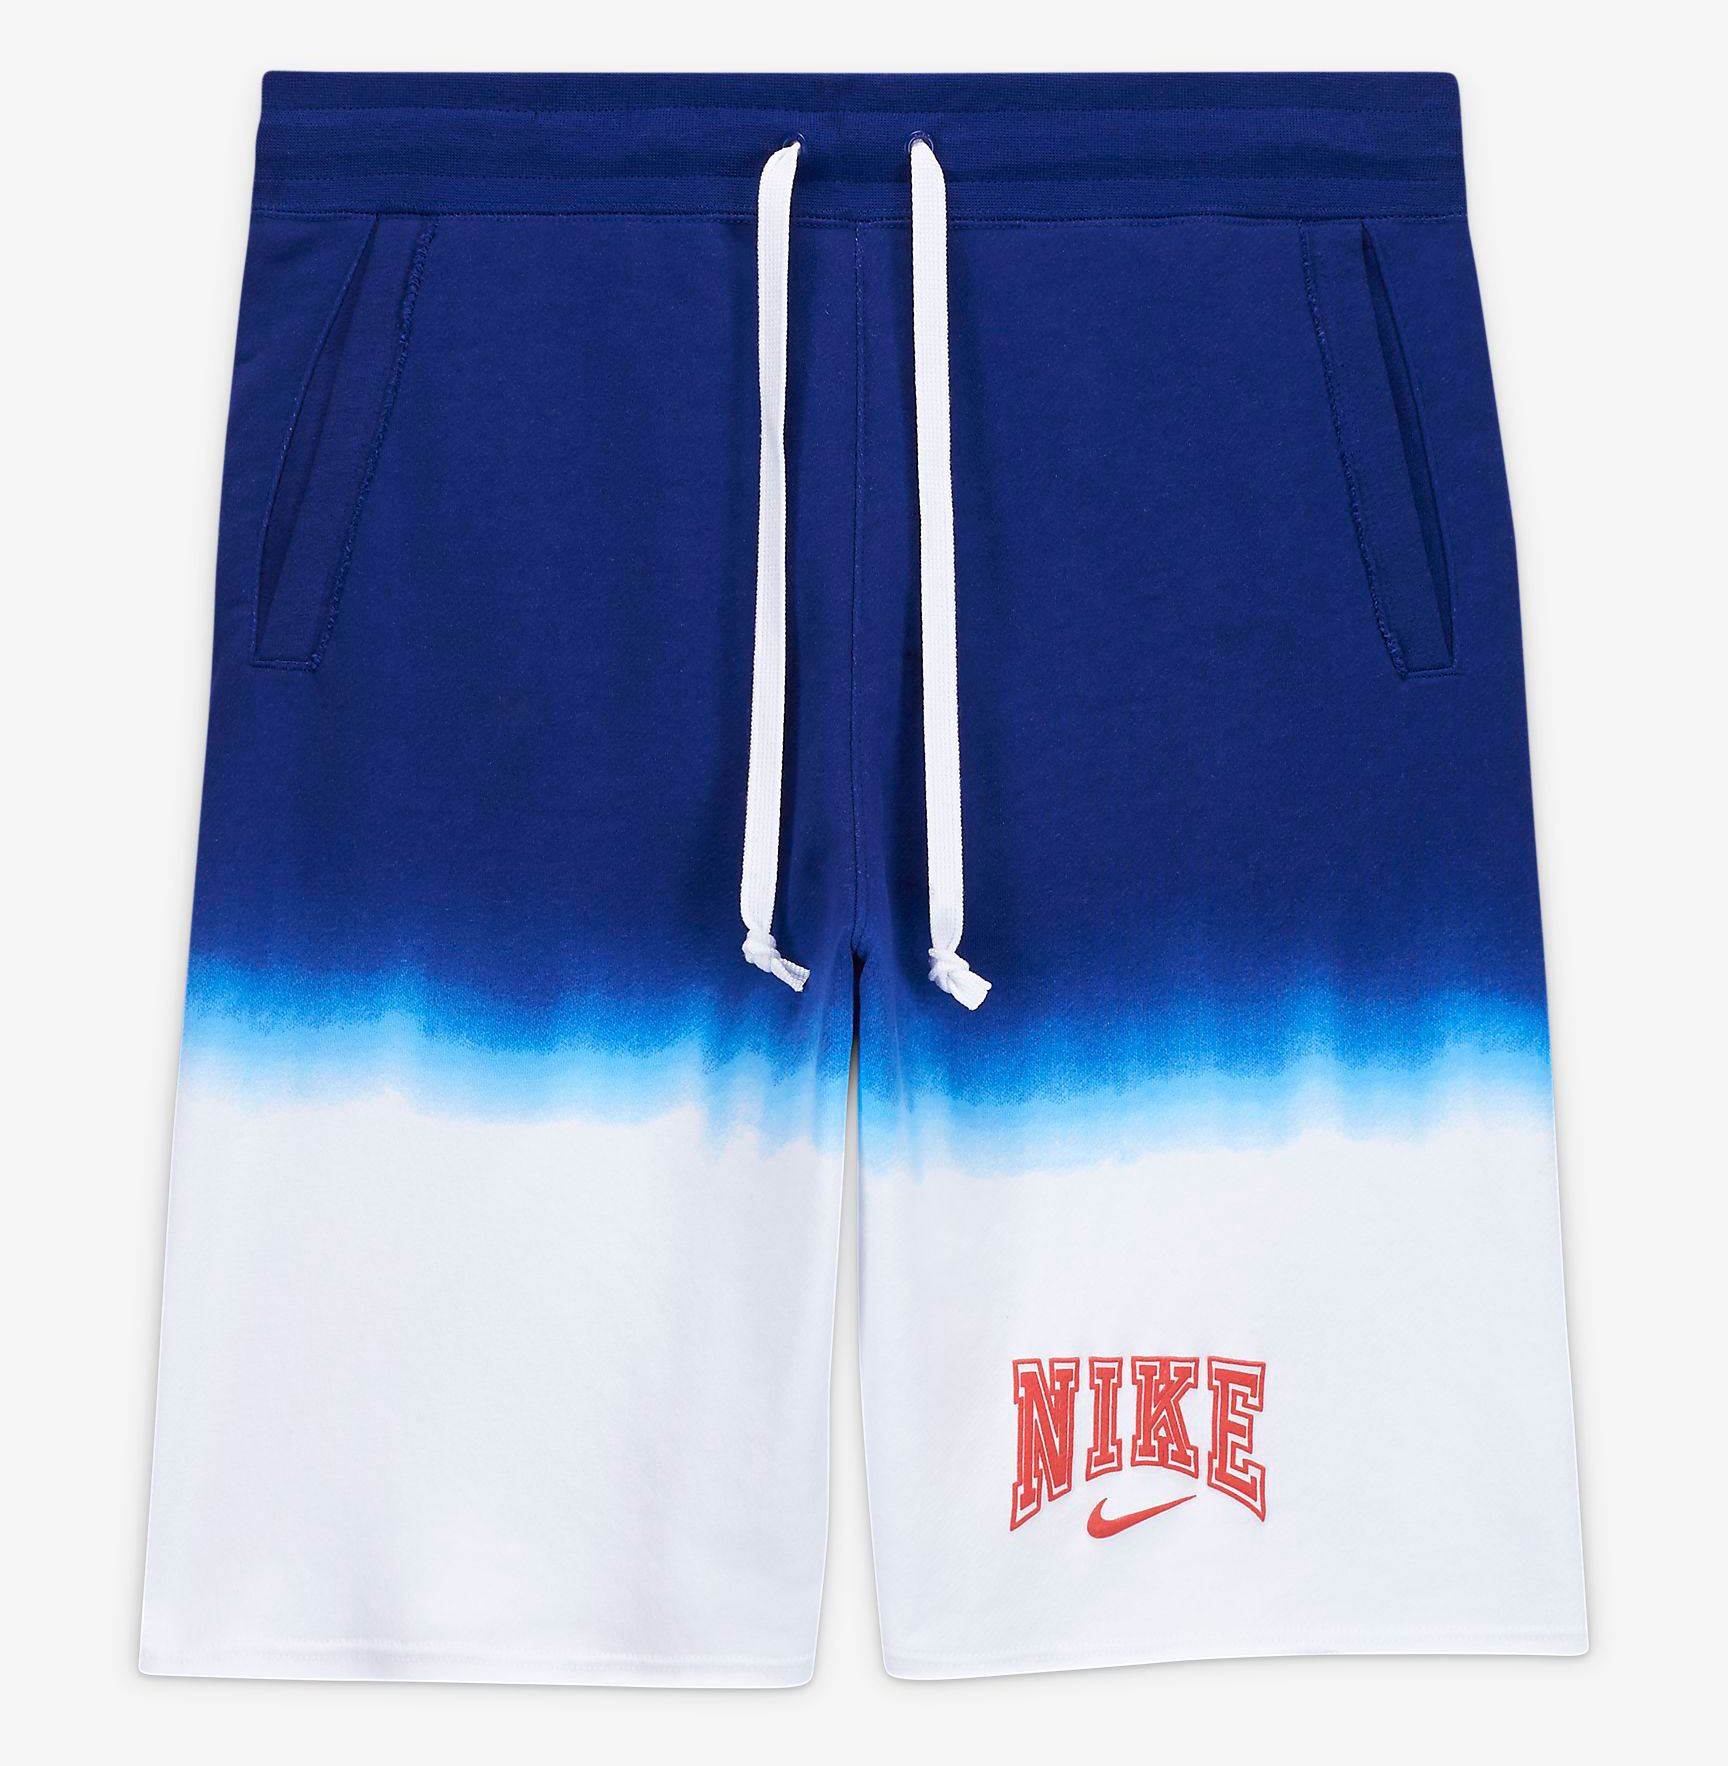 nike-kybrid-s2-what-the-usa-matching-shorts-1